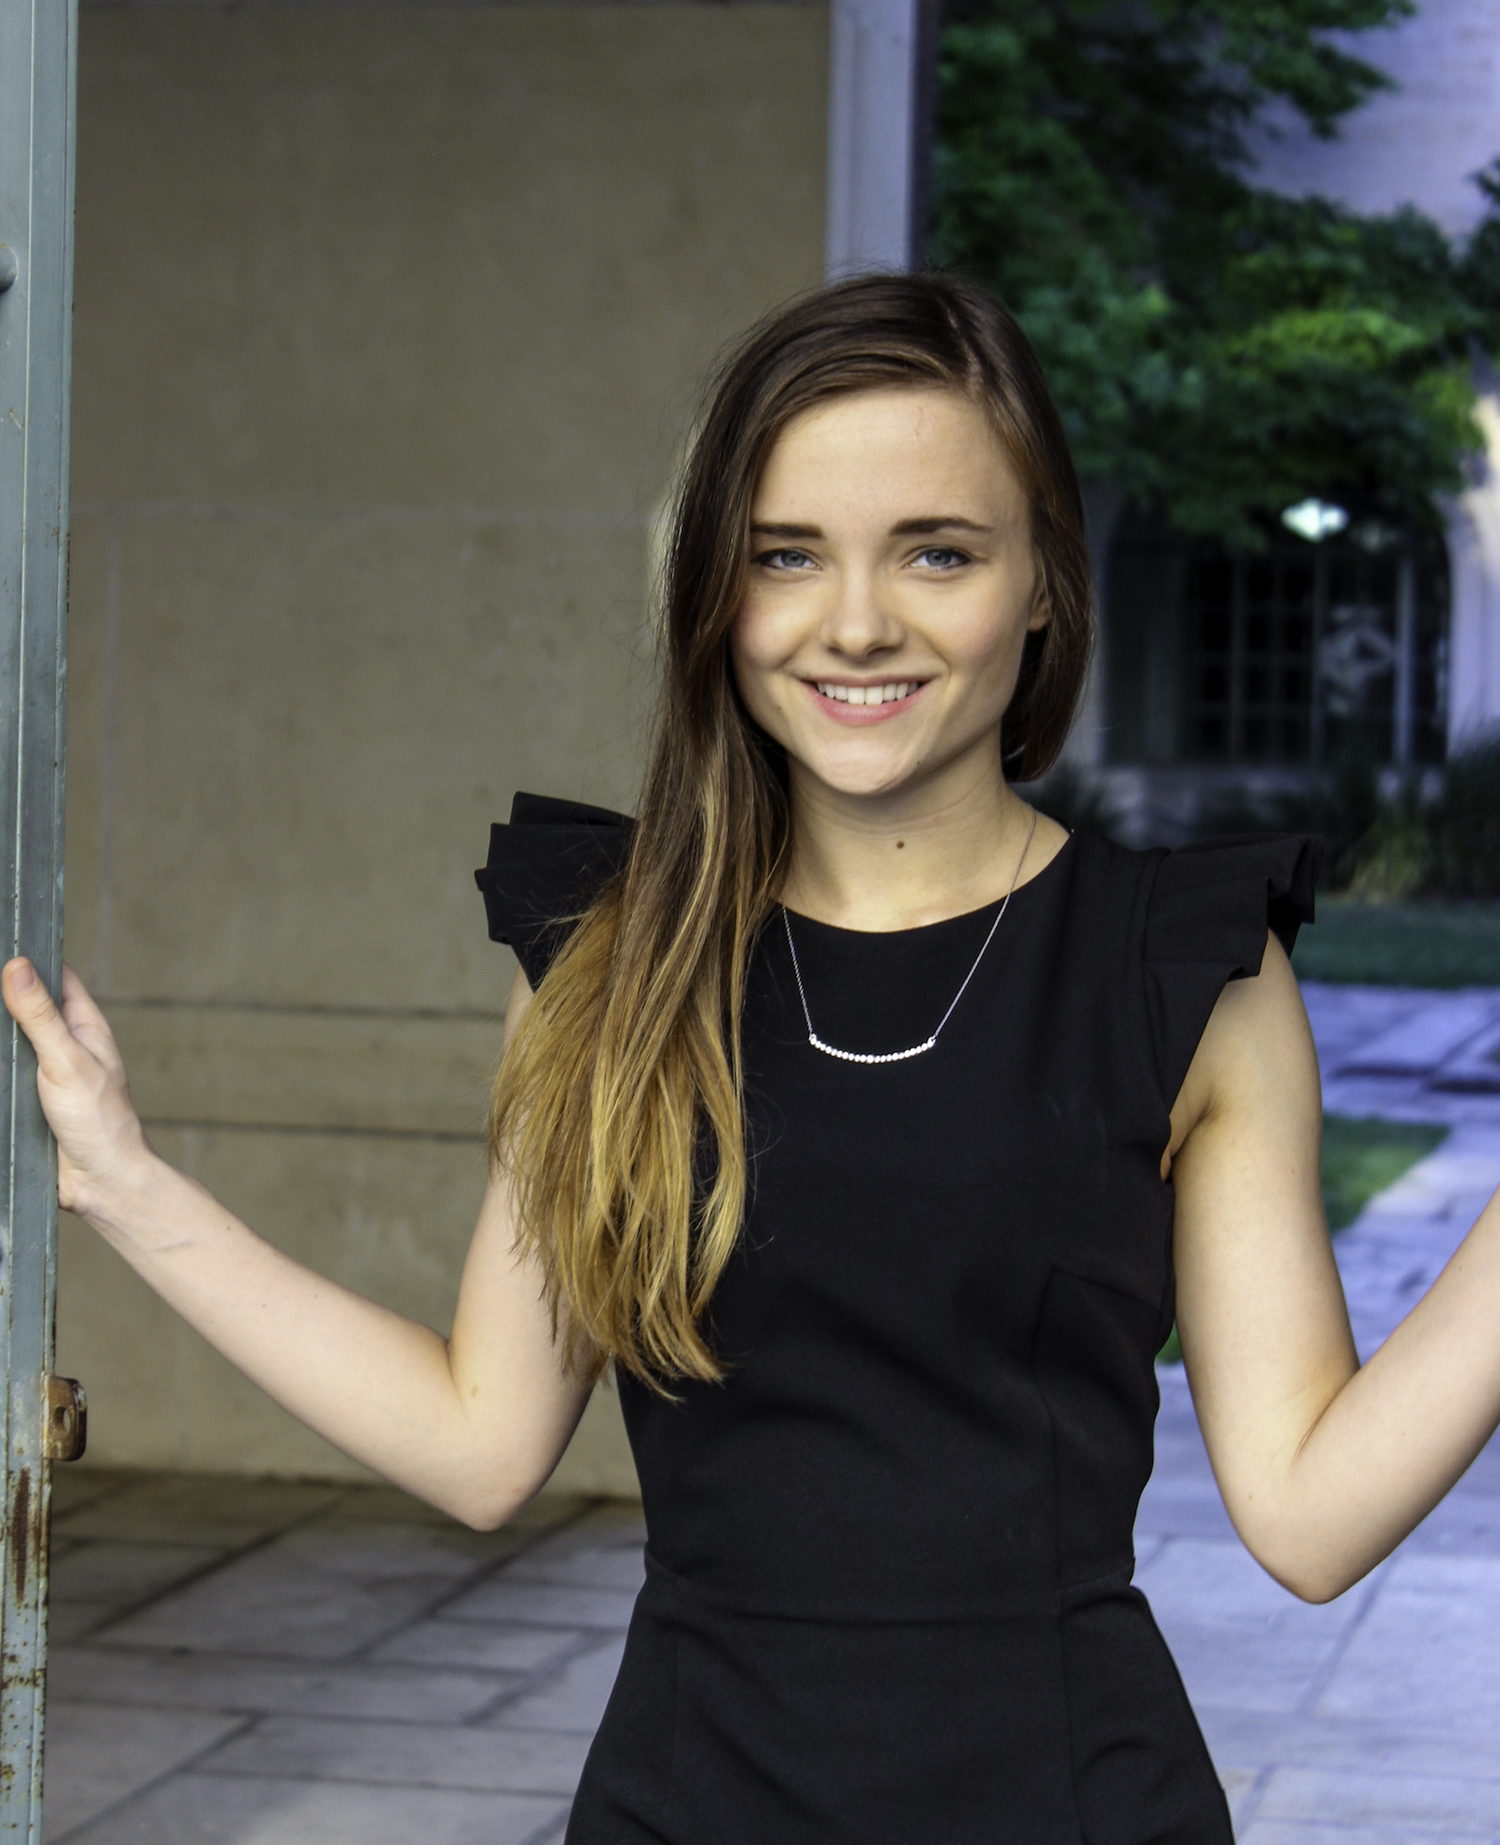 Abigail Newell stands in a black dress with ruffled shoulders, smiling at the camera, with her hands on either side of a doorway in an outdoor space.